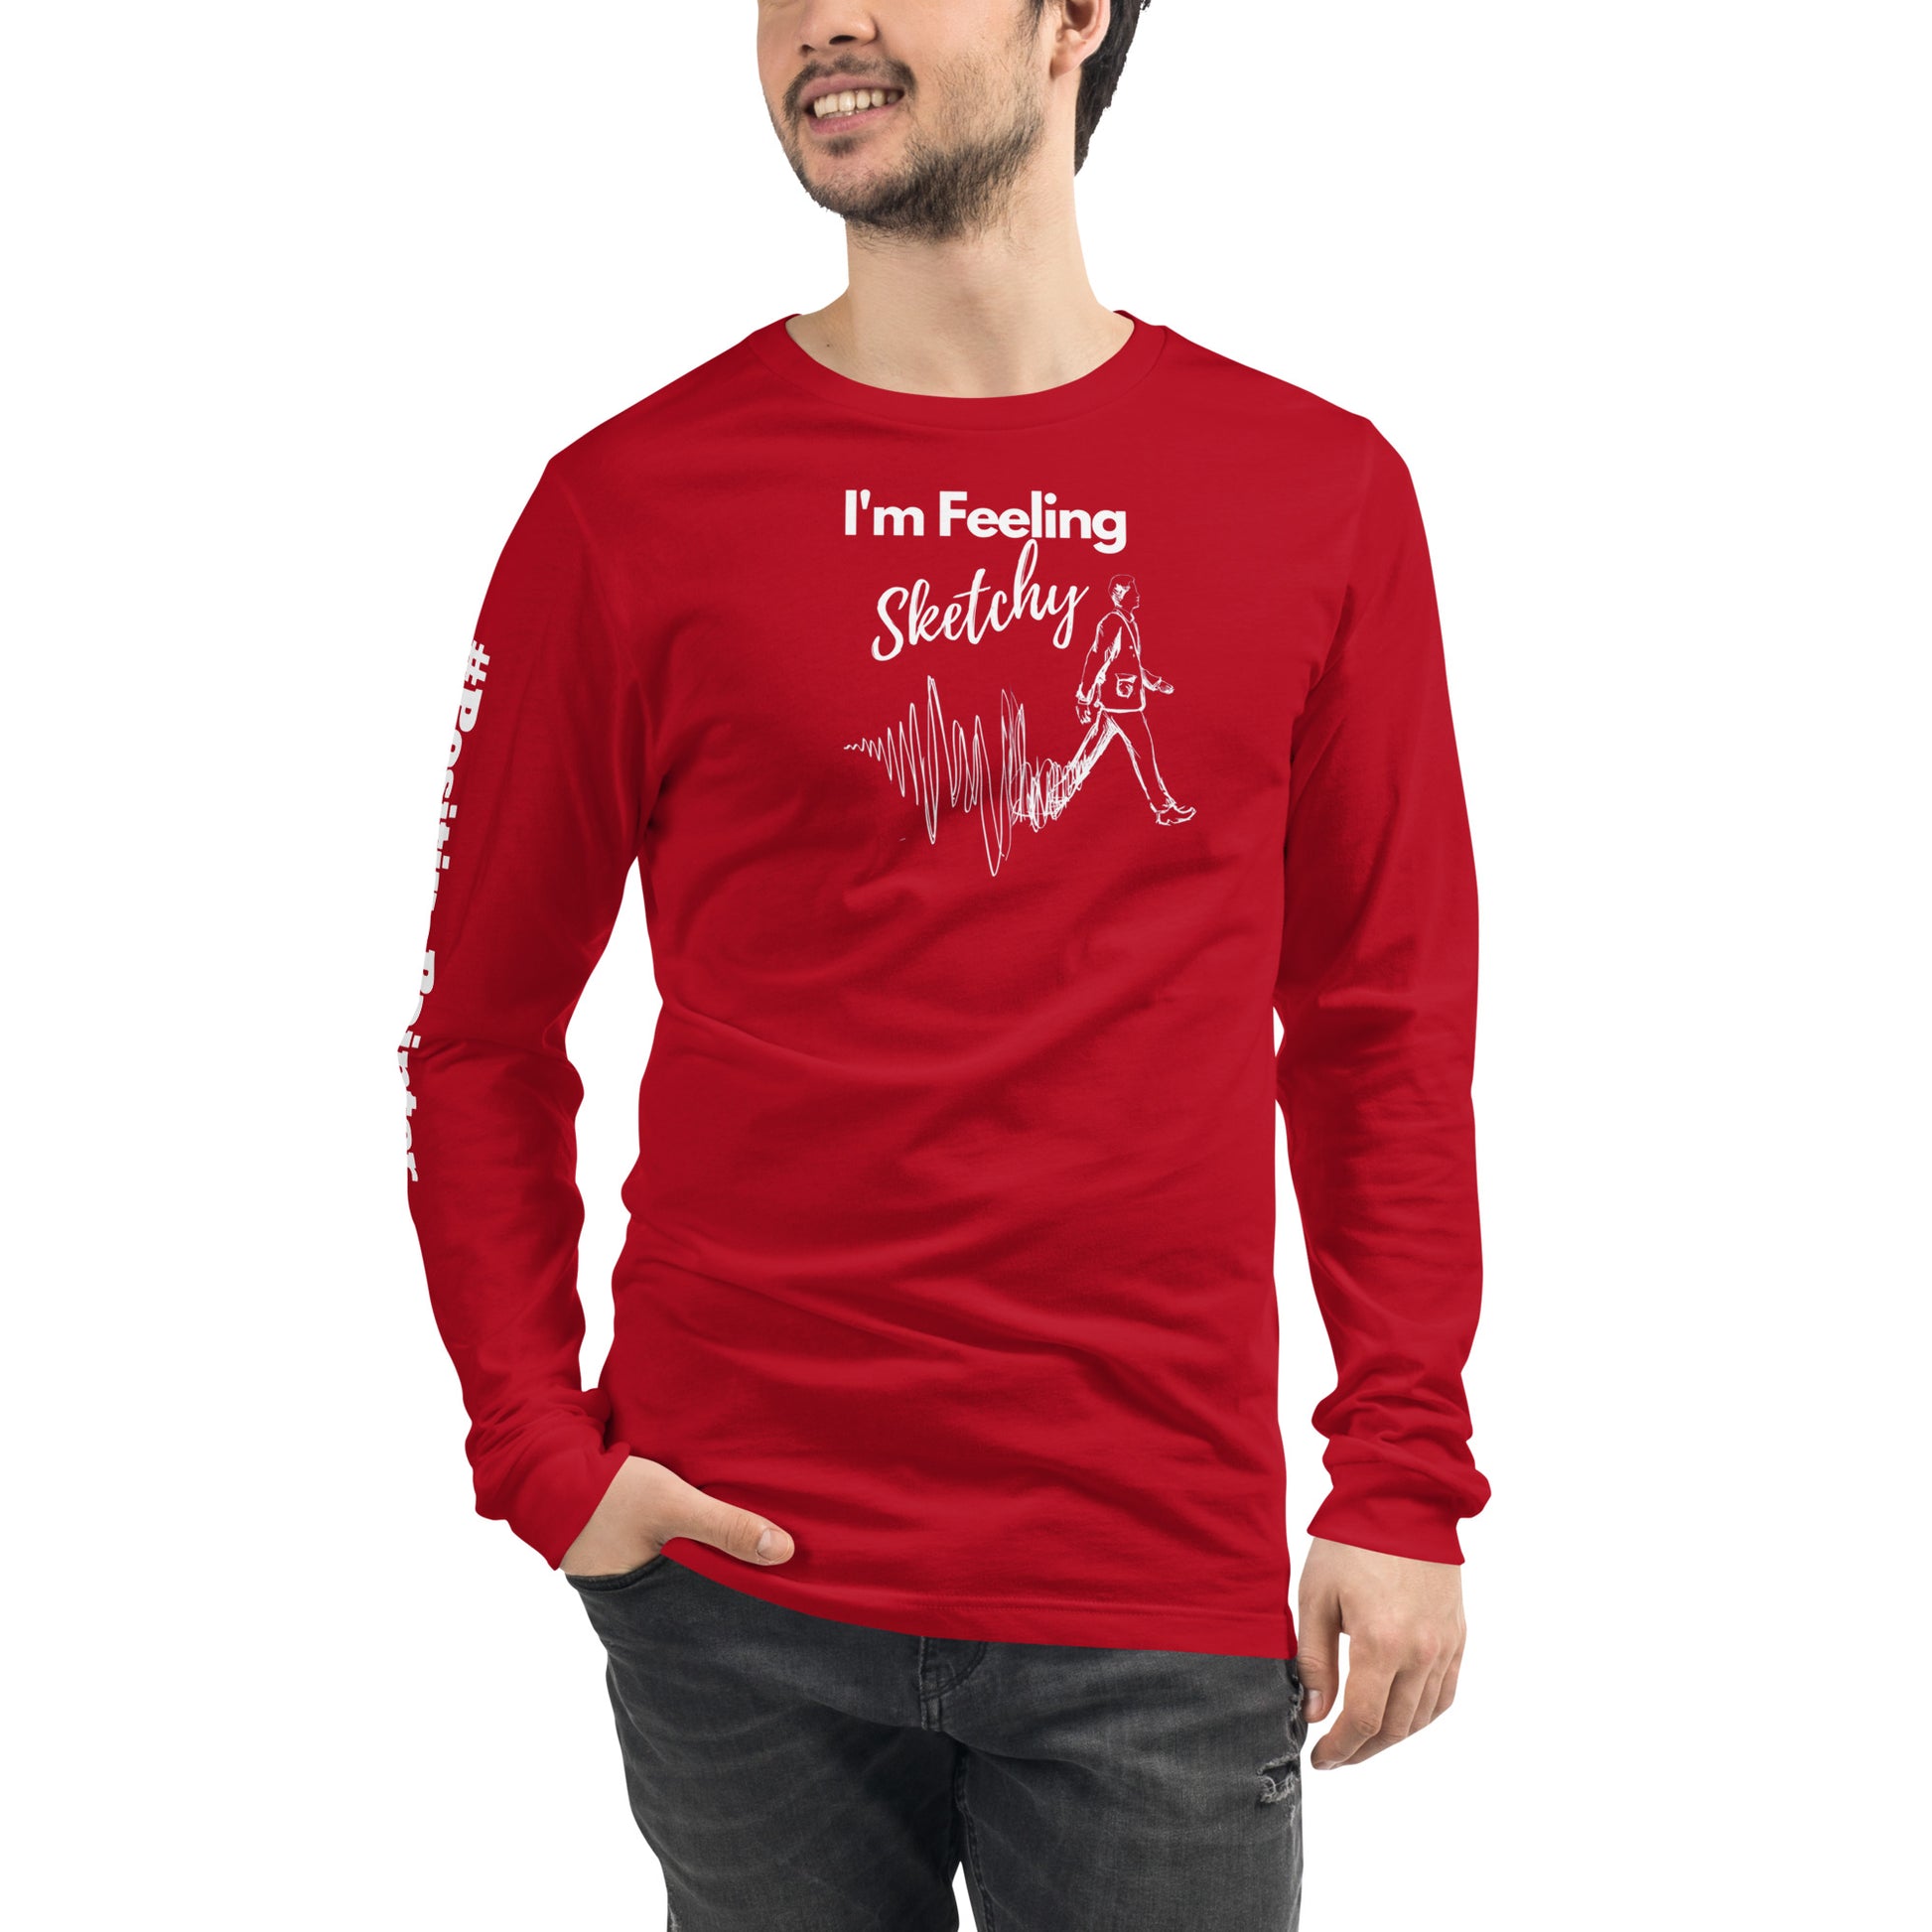 "I'm Feeling Sketchy" Unisex Long Sleeve Tee for artists